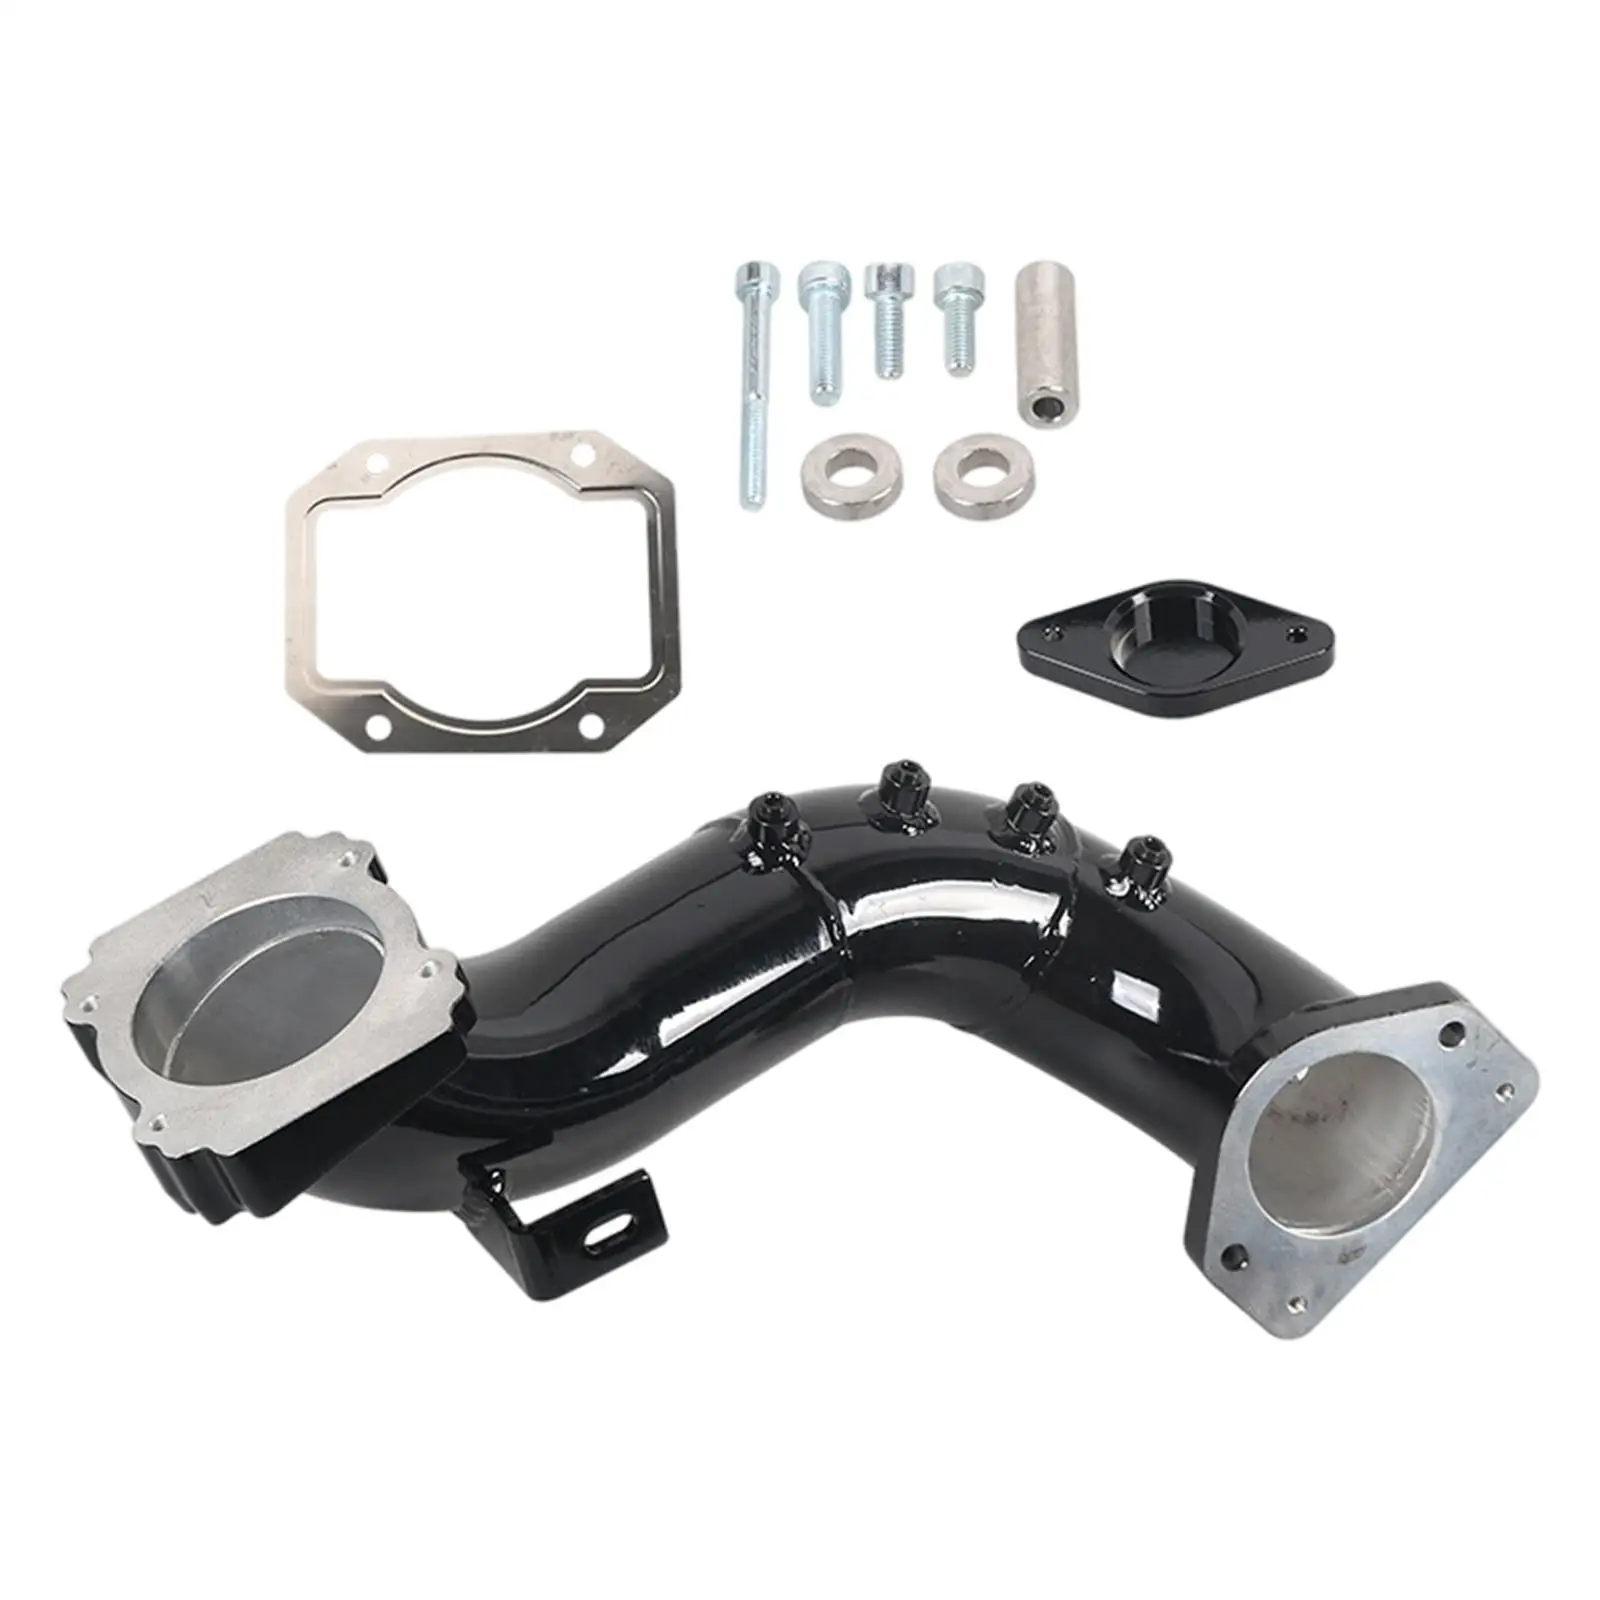 Car Valve Cooler & Intake Tube Bridge Kit for Chevy 2500 3500 6.6l LML Meet the quality standards, tested before shipment